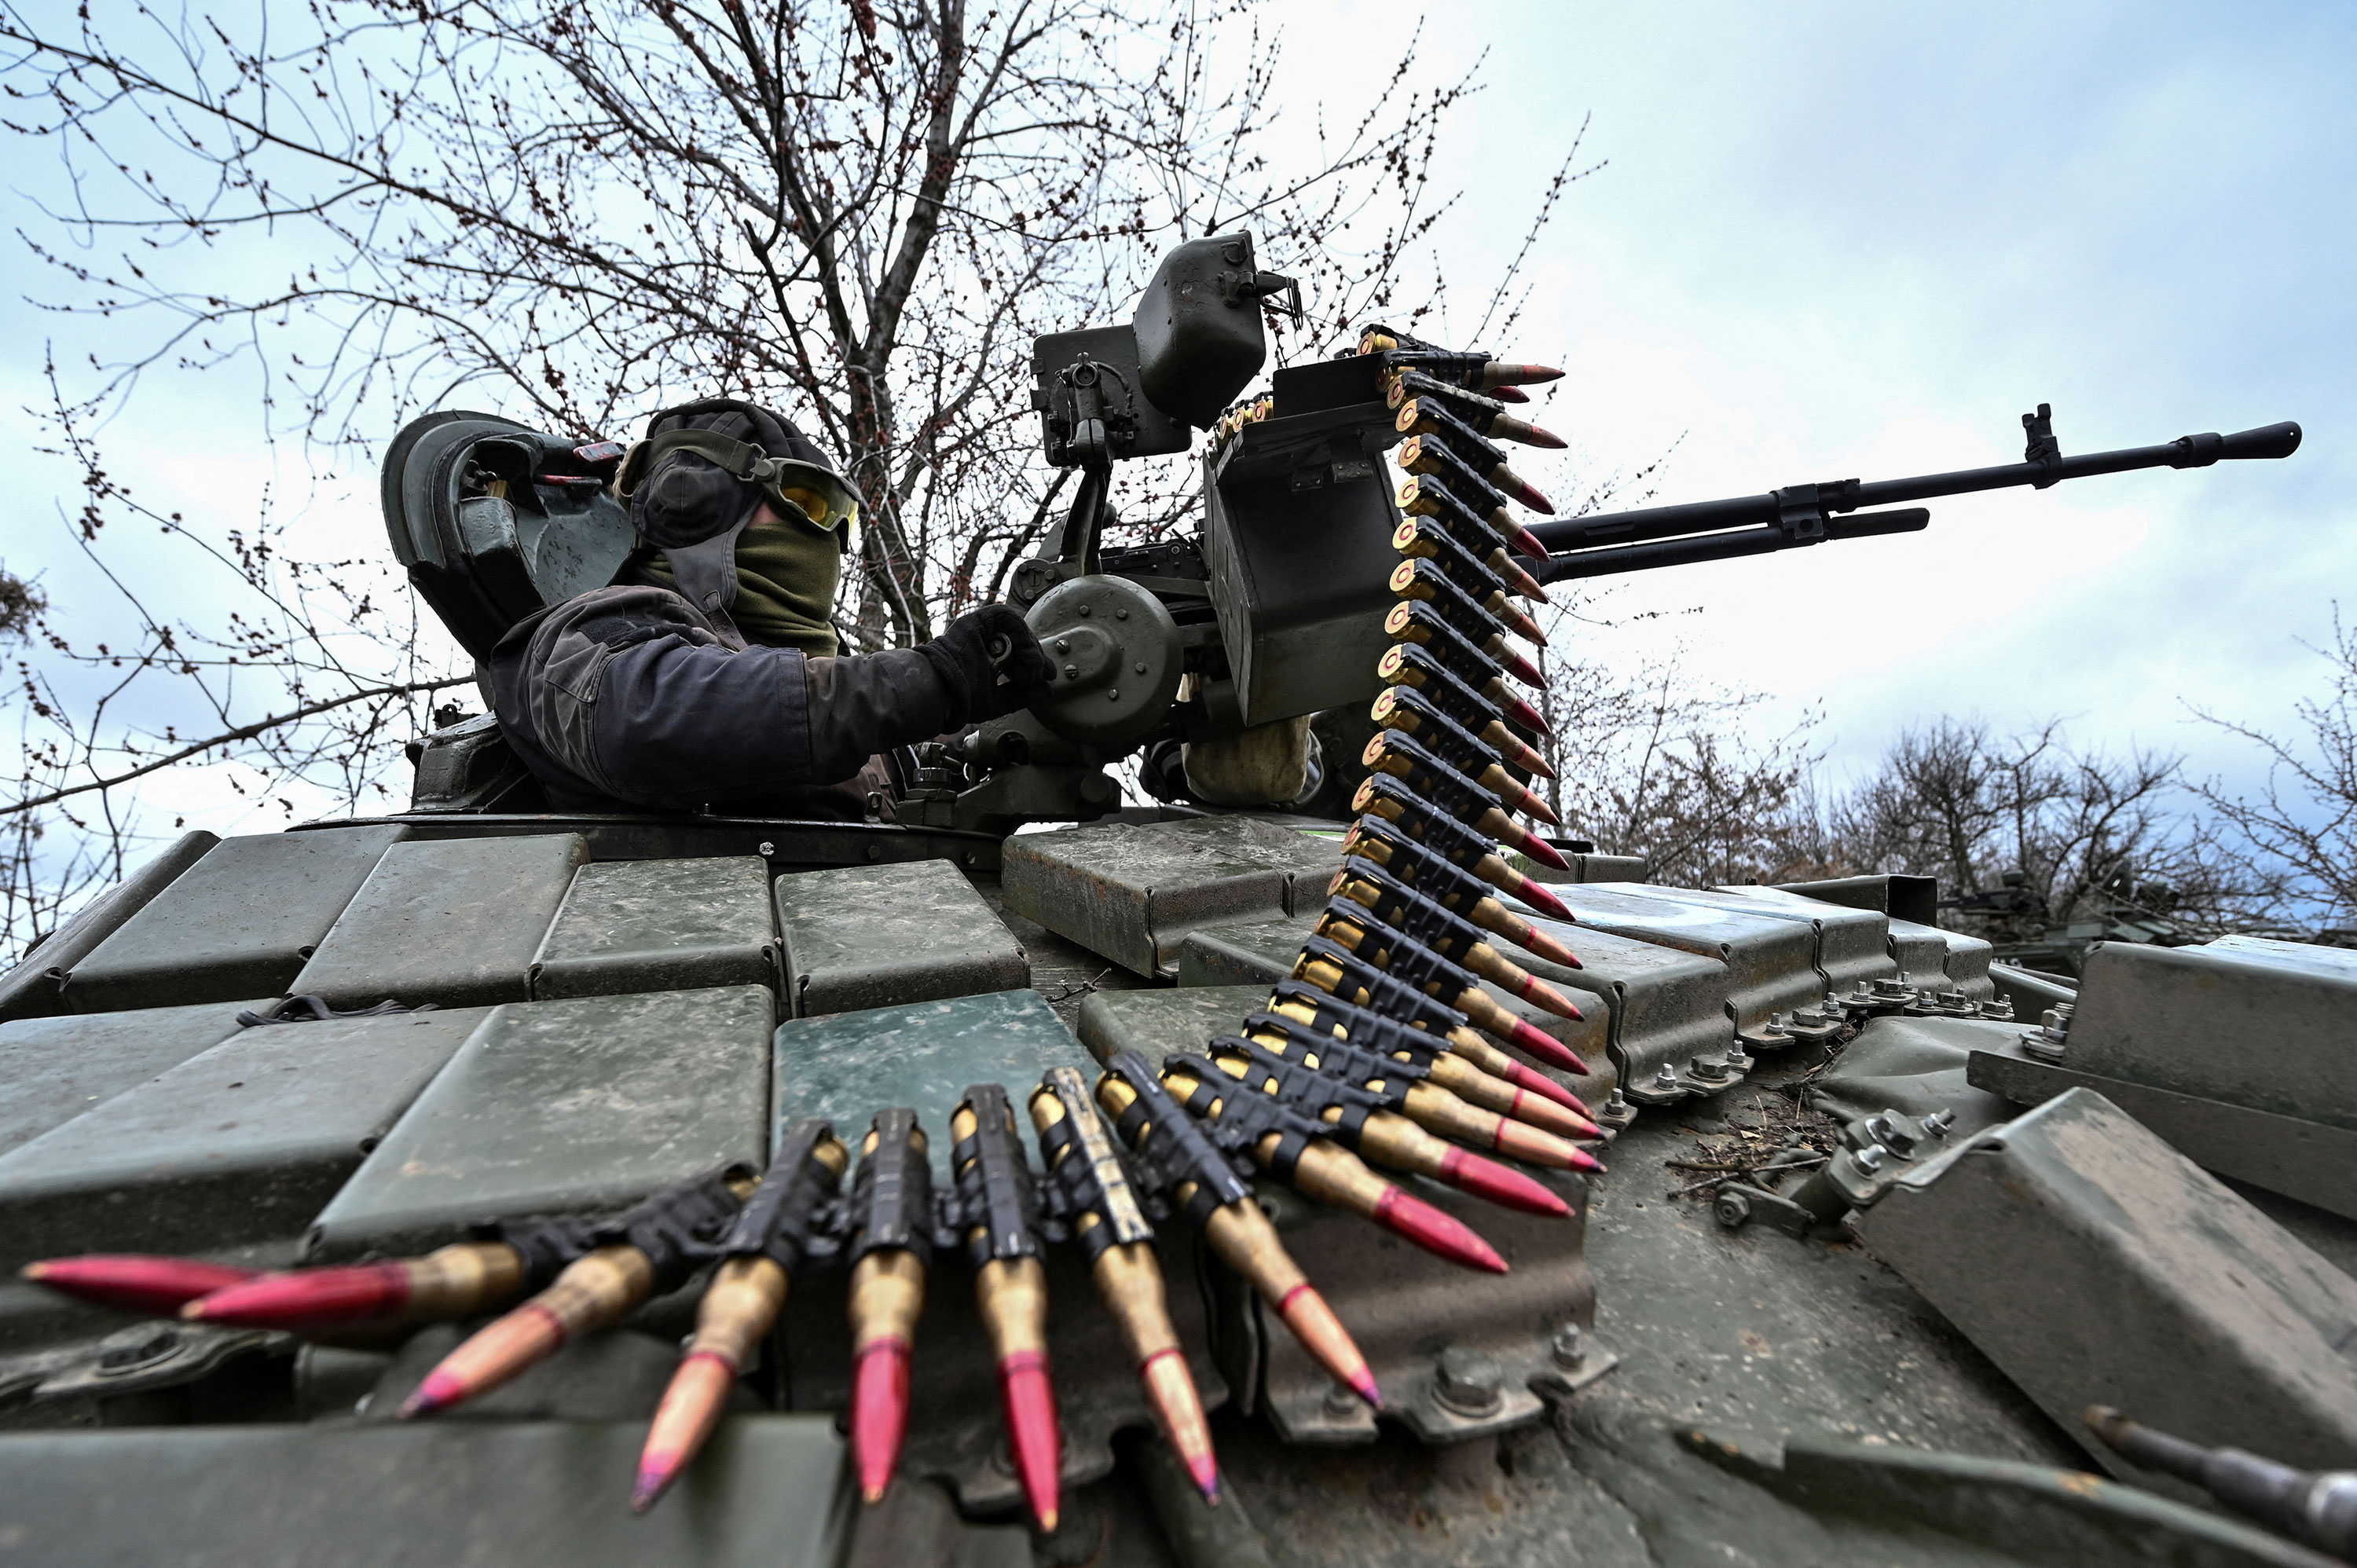 A Ukrainian serviceman checks his weapon after loading ammunition during a military training exercise in the Zaporizhzhia r, Ukraine March 29, 2023. REUTERS/Stringer/File Photo